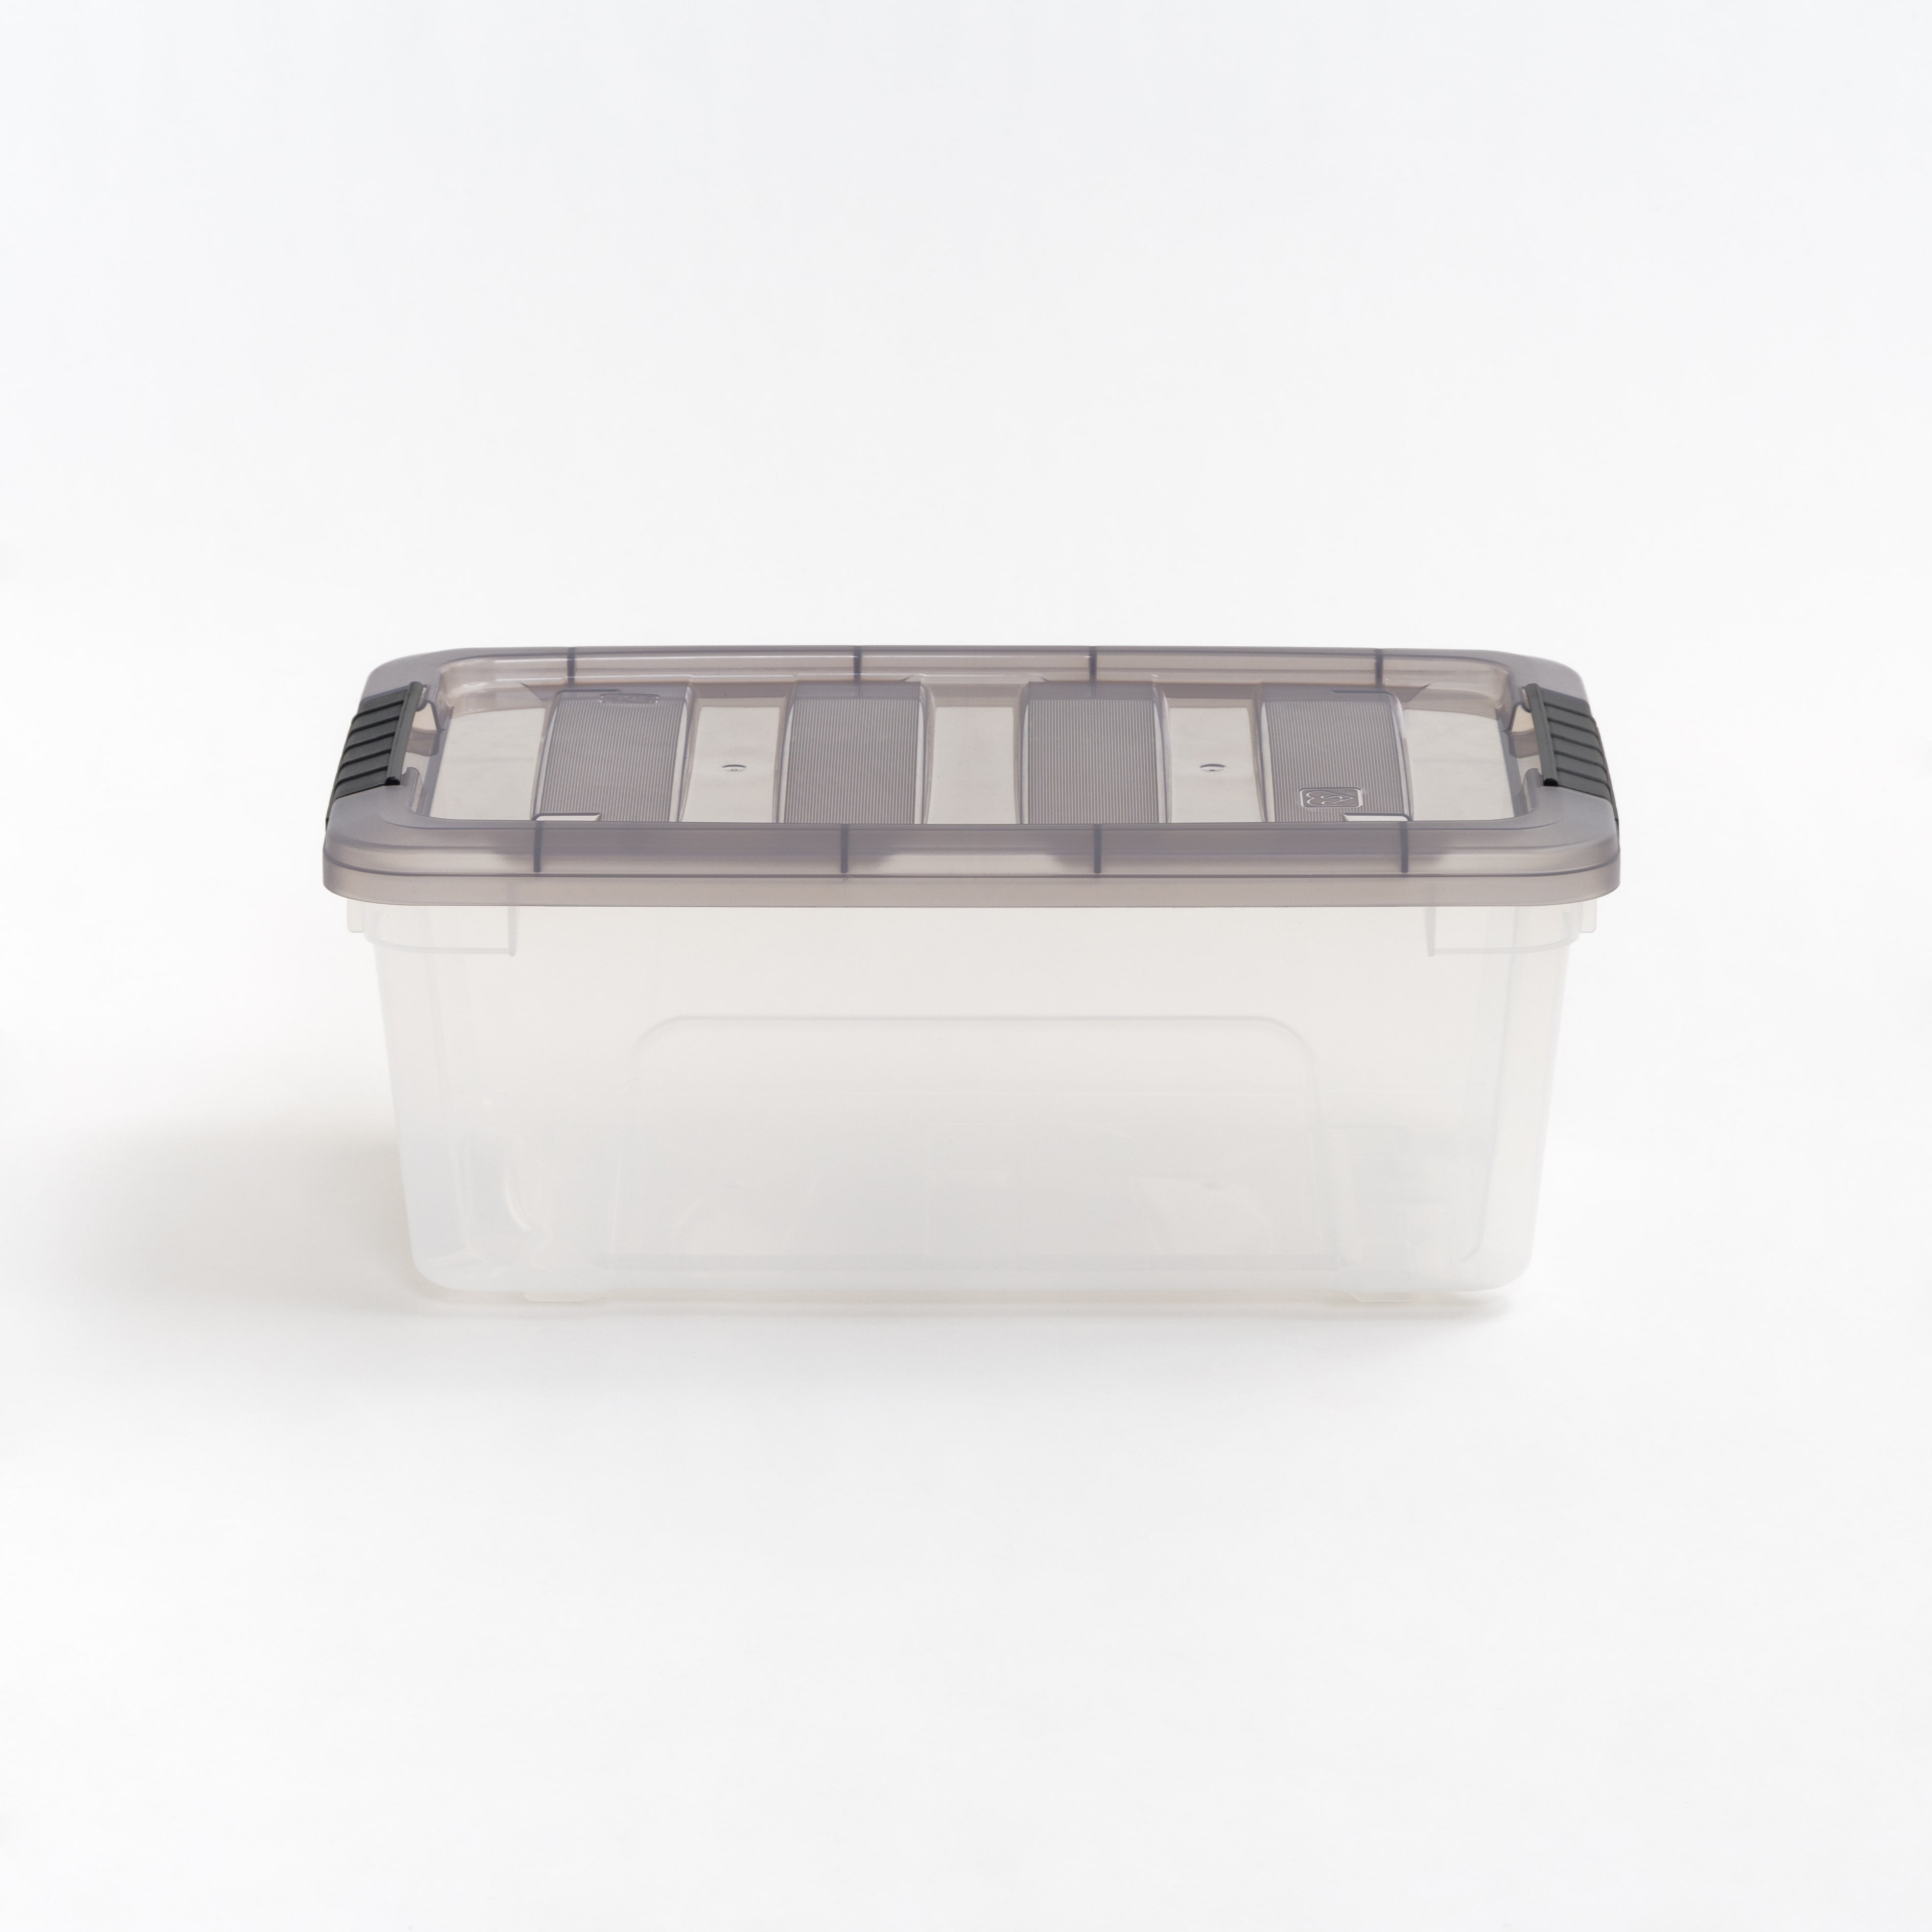 Iris Clear Stack and Pull Latching Flat Lid Storage Box, 22 x 16.5 x 13.03 inch